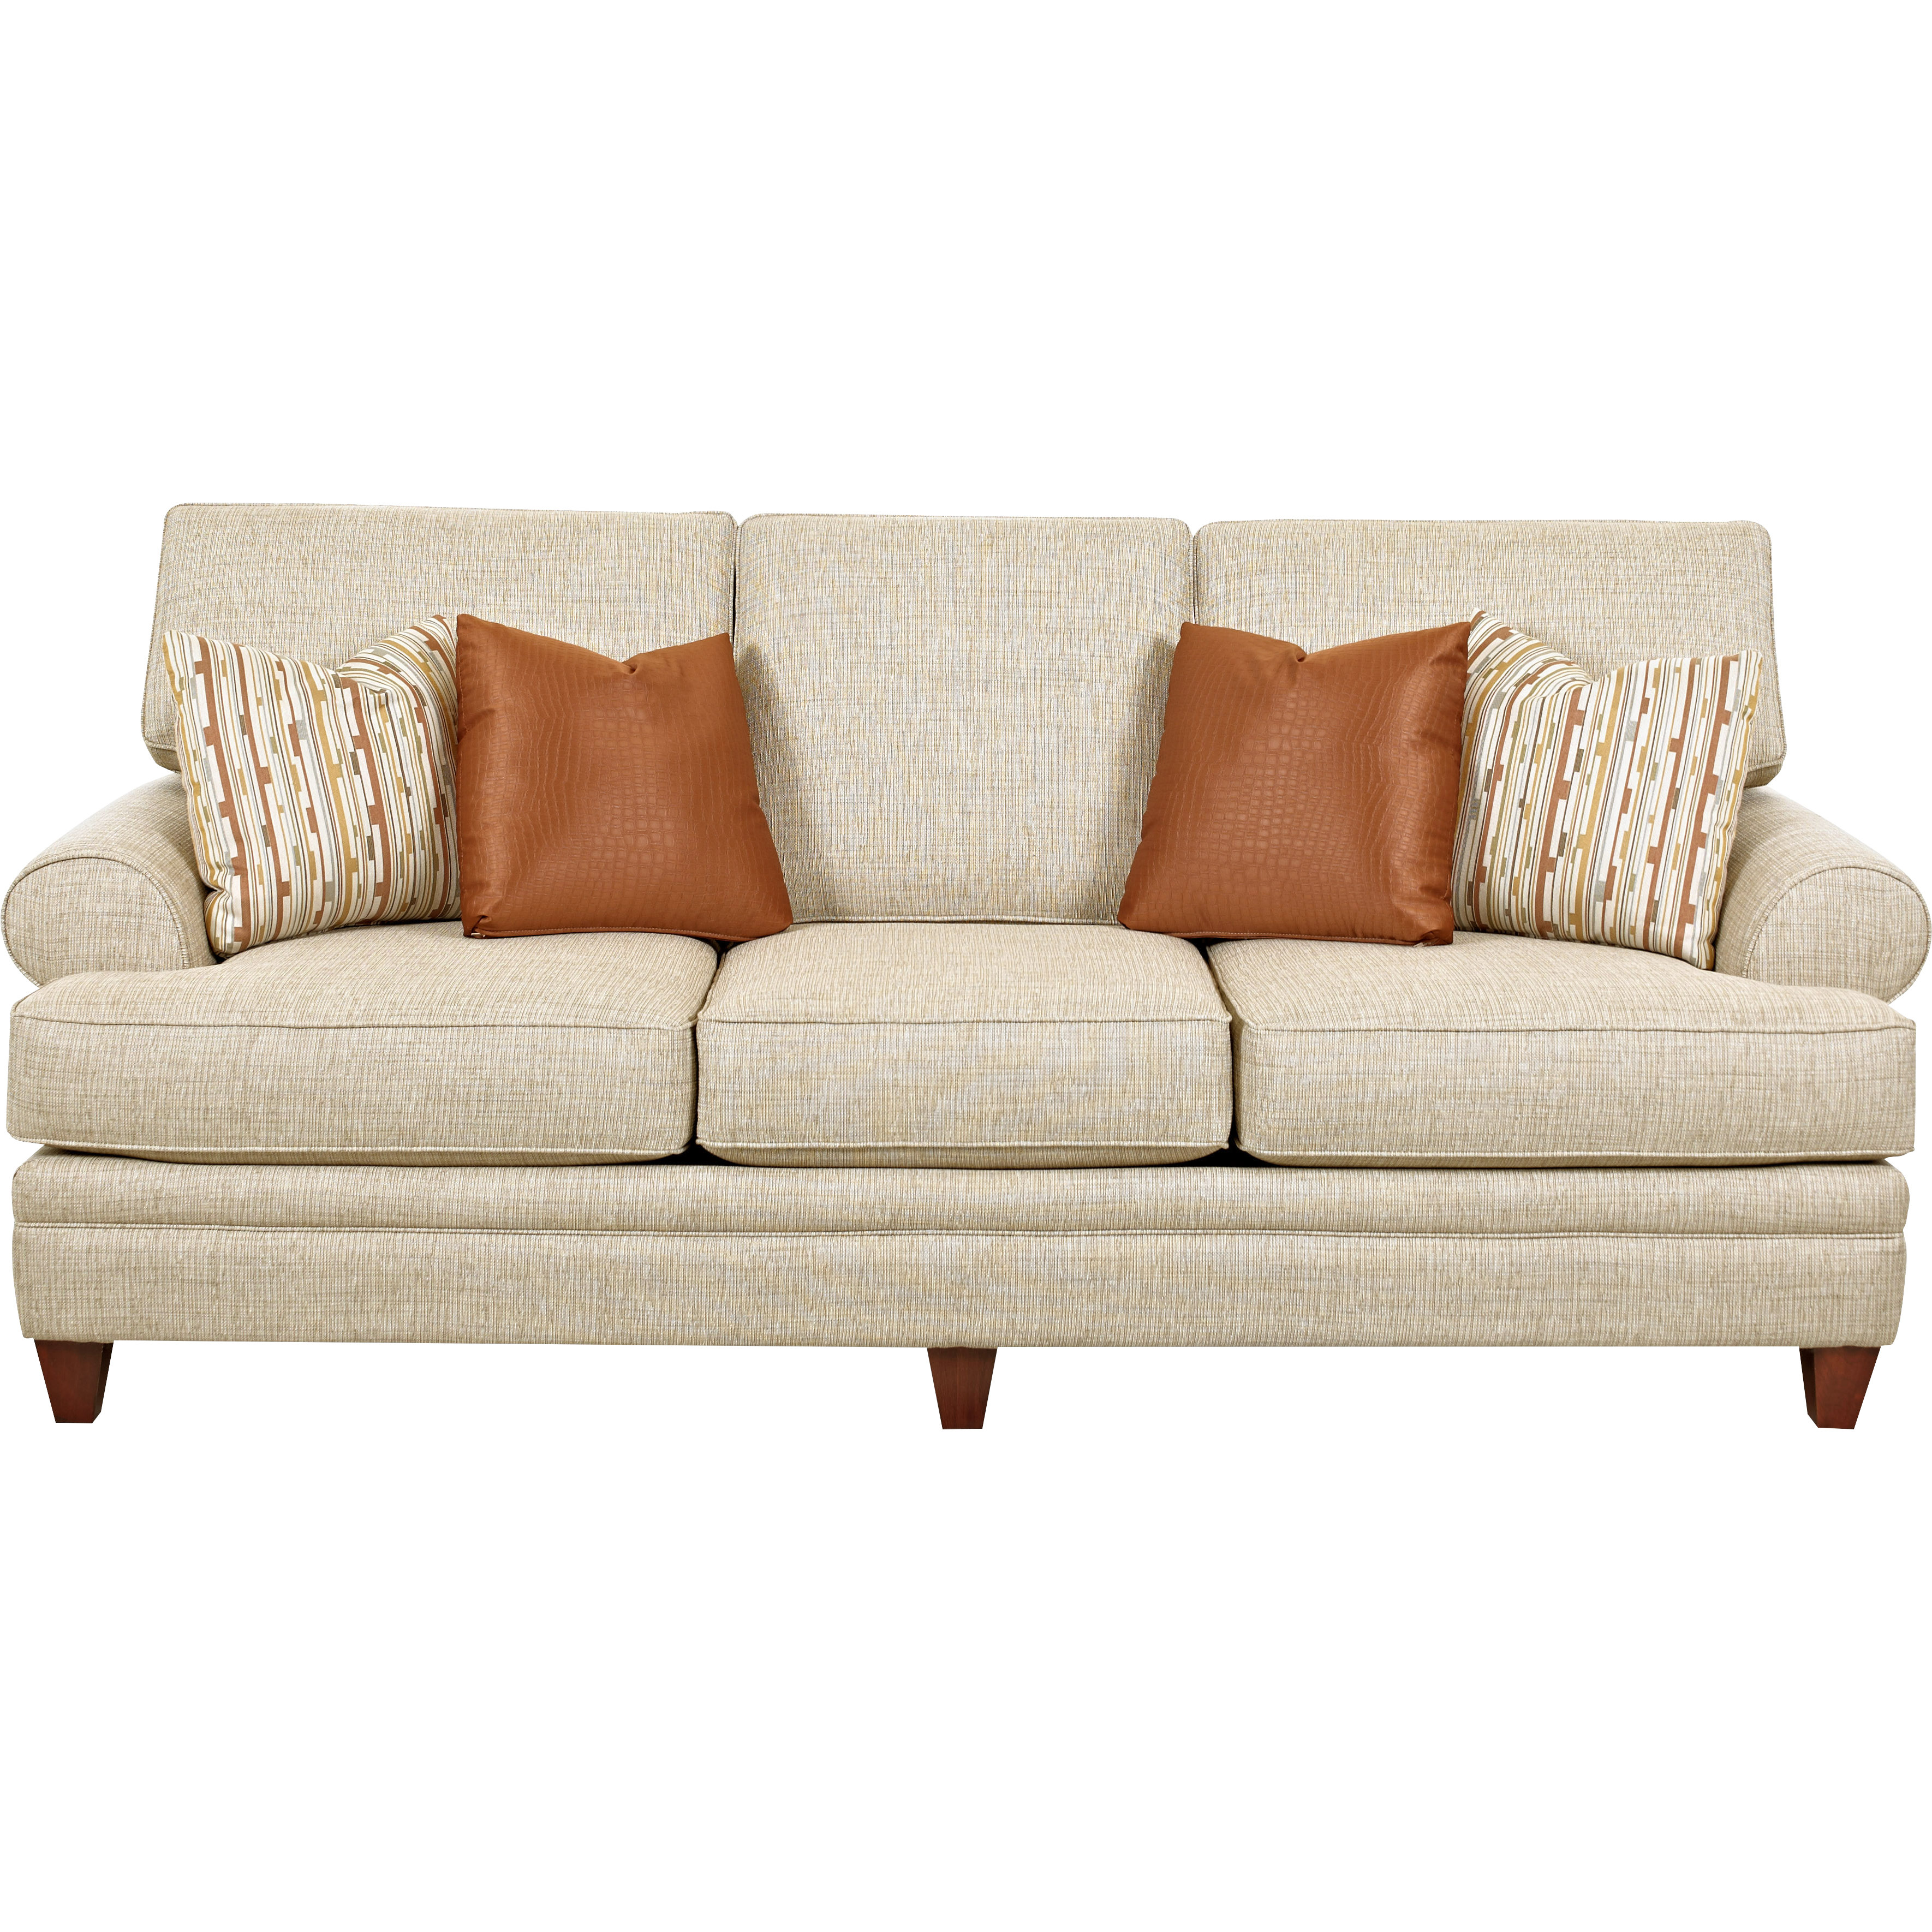 Klaussner Furniture Clayton Living Room Collection & Reviews Wayfair